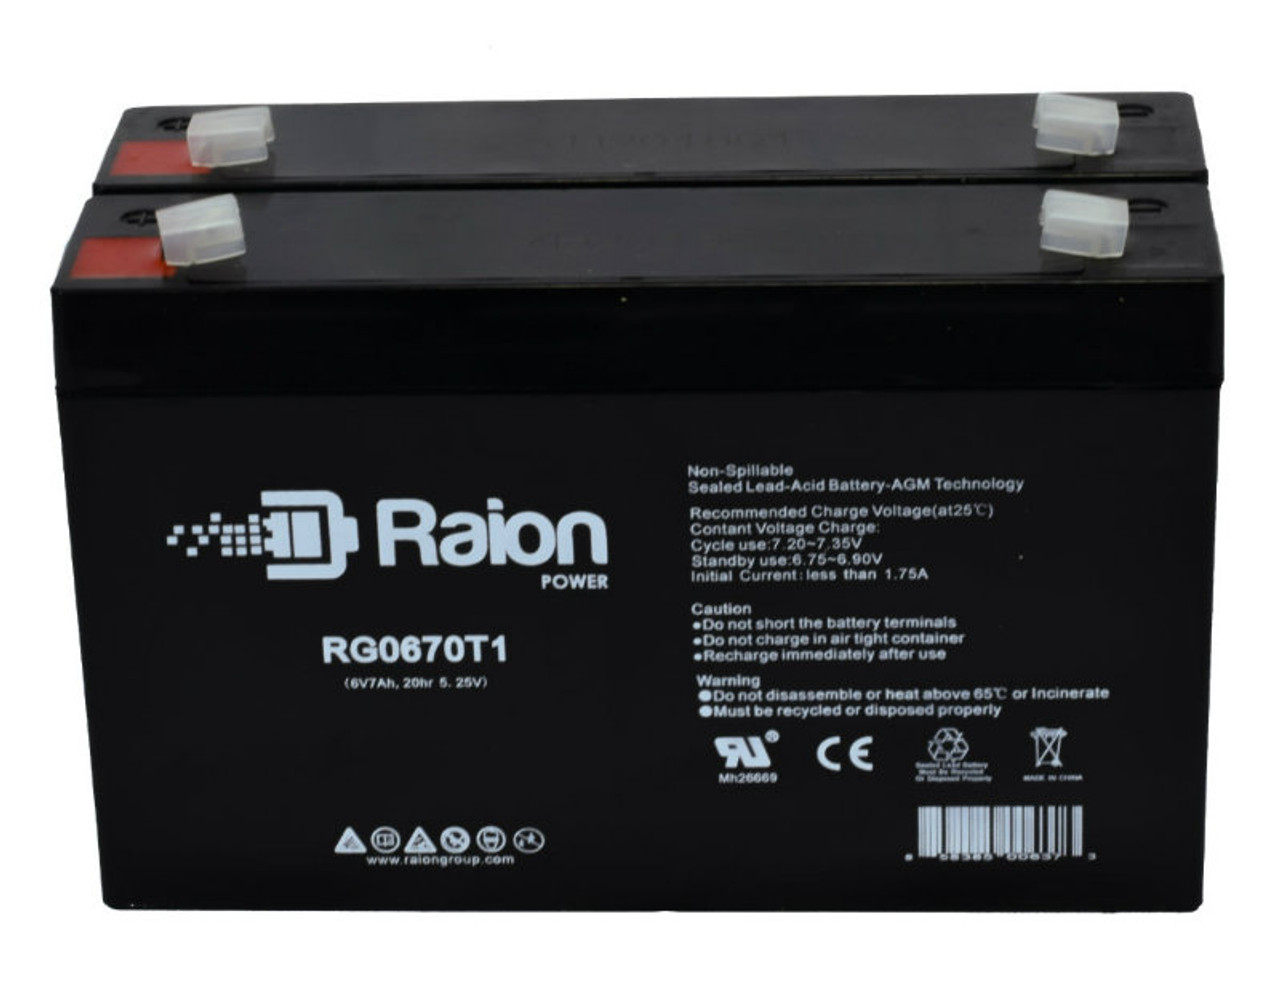 Raion Power RG0670T1 6V 7Ah Replacement Battery for McGaw Accu Pro Infusion Pump N7510 - 2 Pack